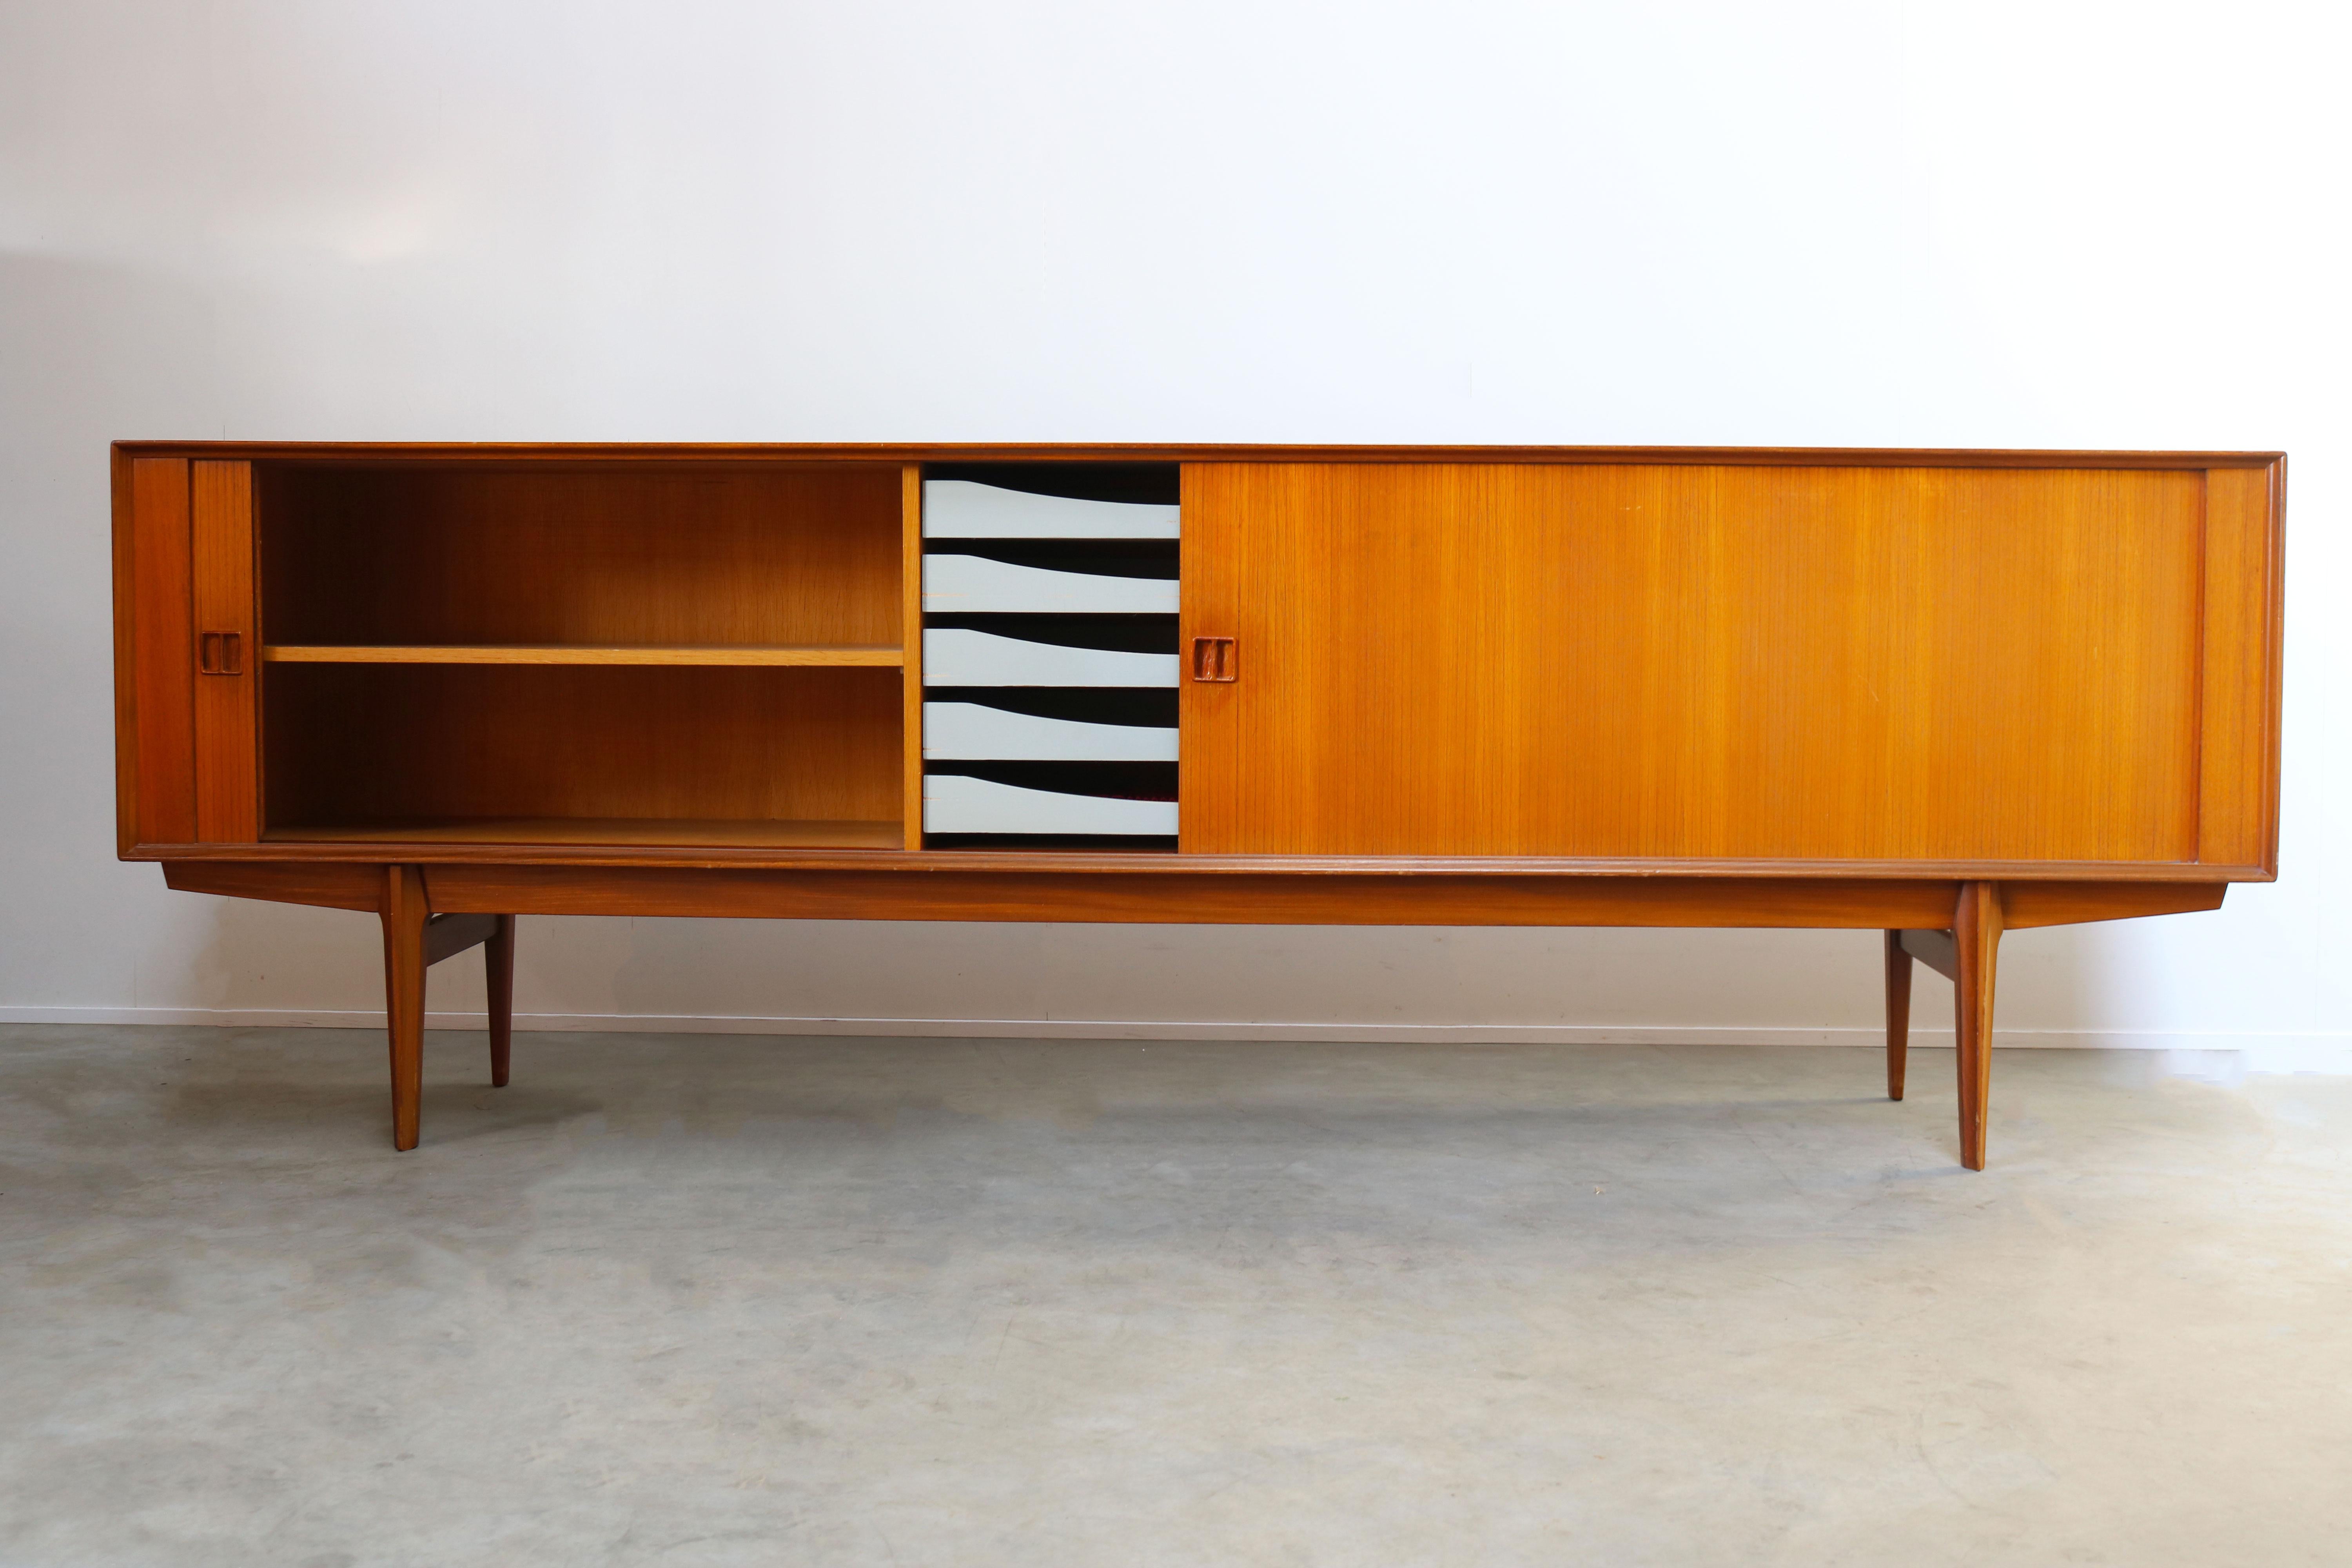 Gorgeous Minimalist sideboard / credenza by designer Oswald Vermaercke for V-Form in the 1950s.
The sideboard has a amazing clean design. The tambour doors disappear completely when opened and the craftsmanship on this piece is exceptional. Amazing